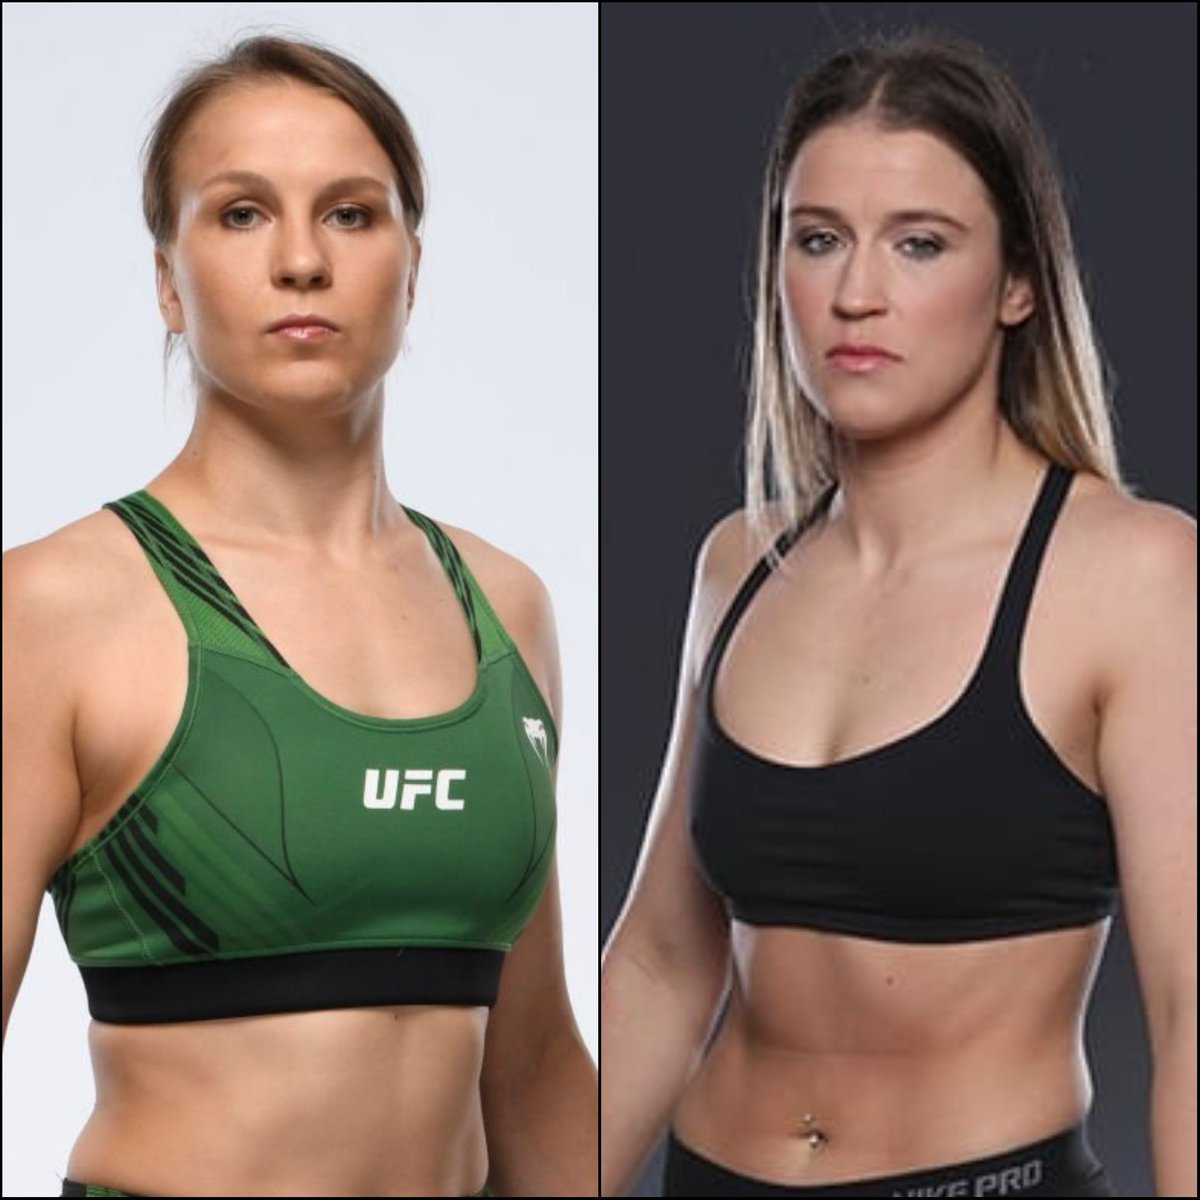 L.Letson out. Julija Stoliarenko in, will fight Chelsea Chandler at UFC event on October 1st. (per @chelseachand209 on the #A1Combat4 broadcast) #UFC #MMA #UFCESPN